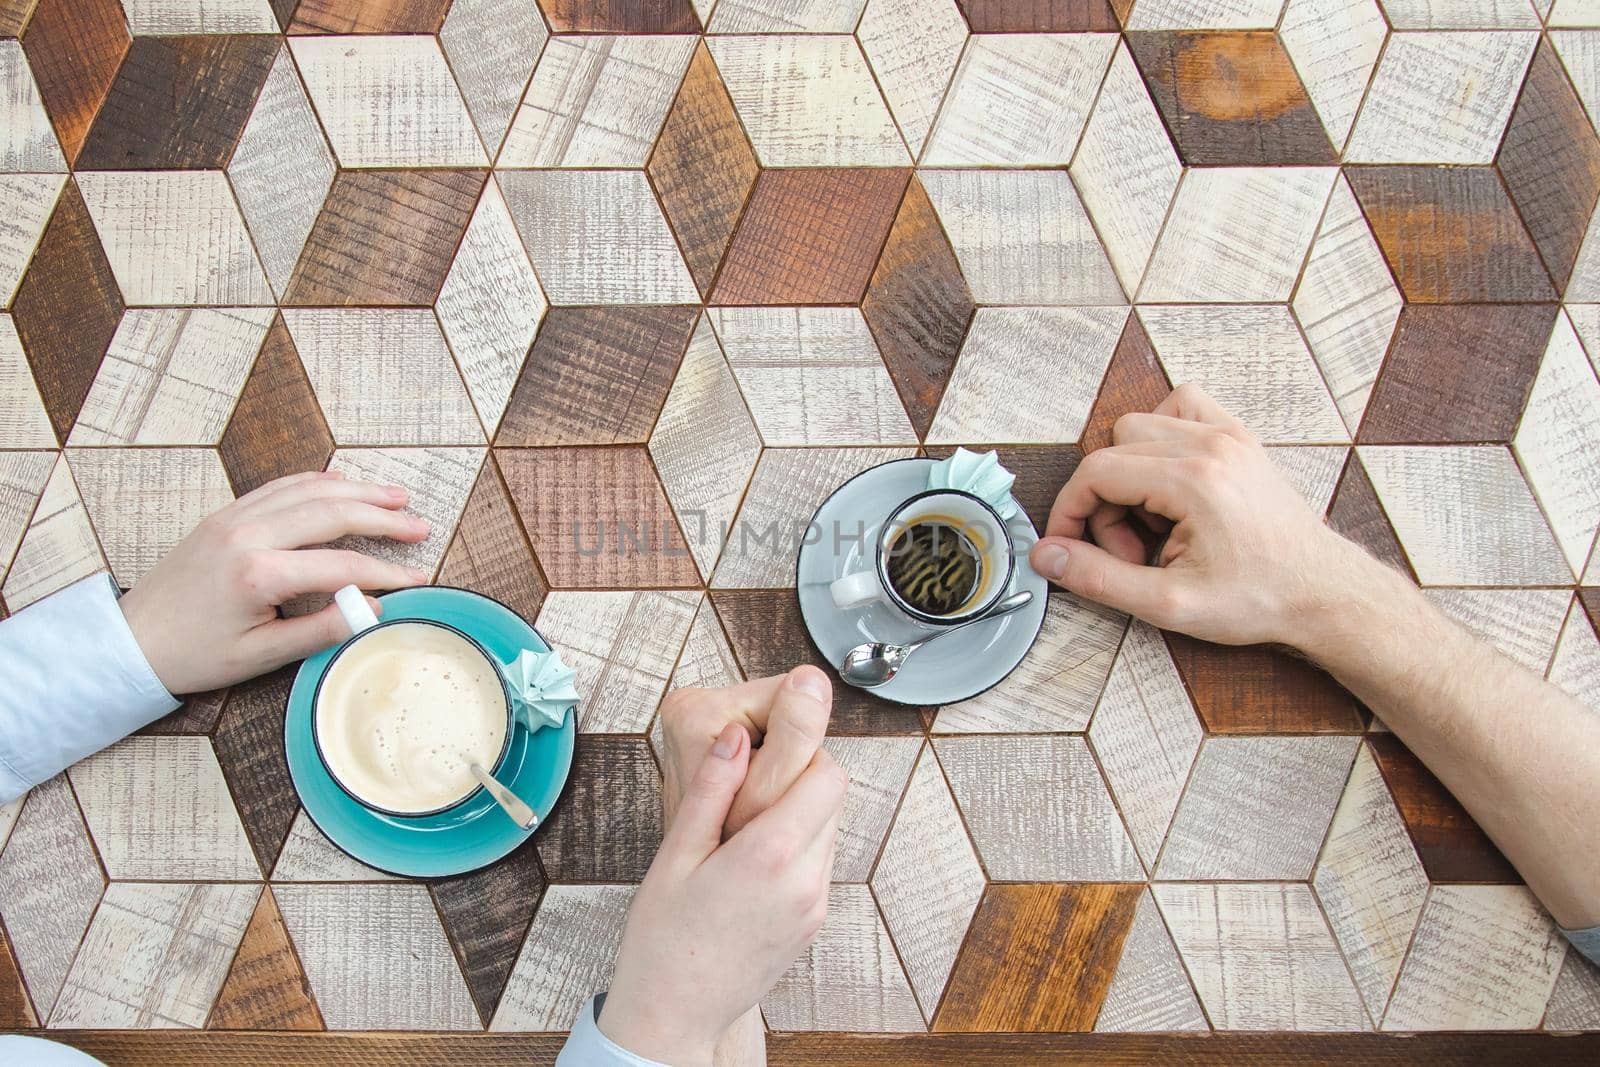 Top view of couple holding by hands and drinking coffee beautiful wooden countertop mosaic